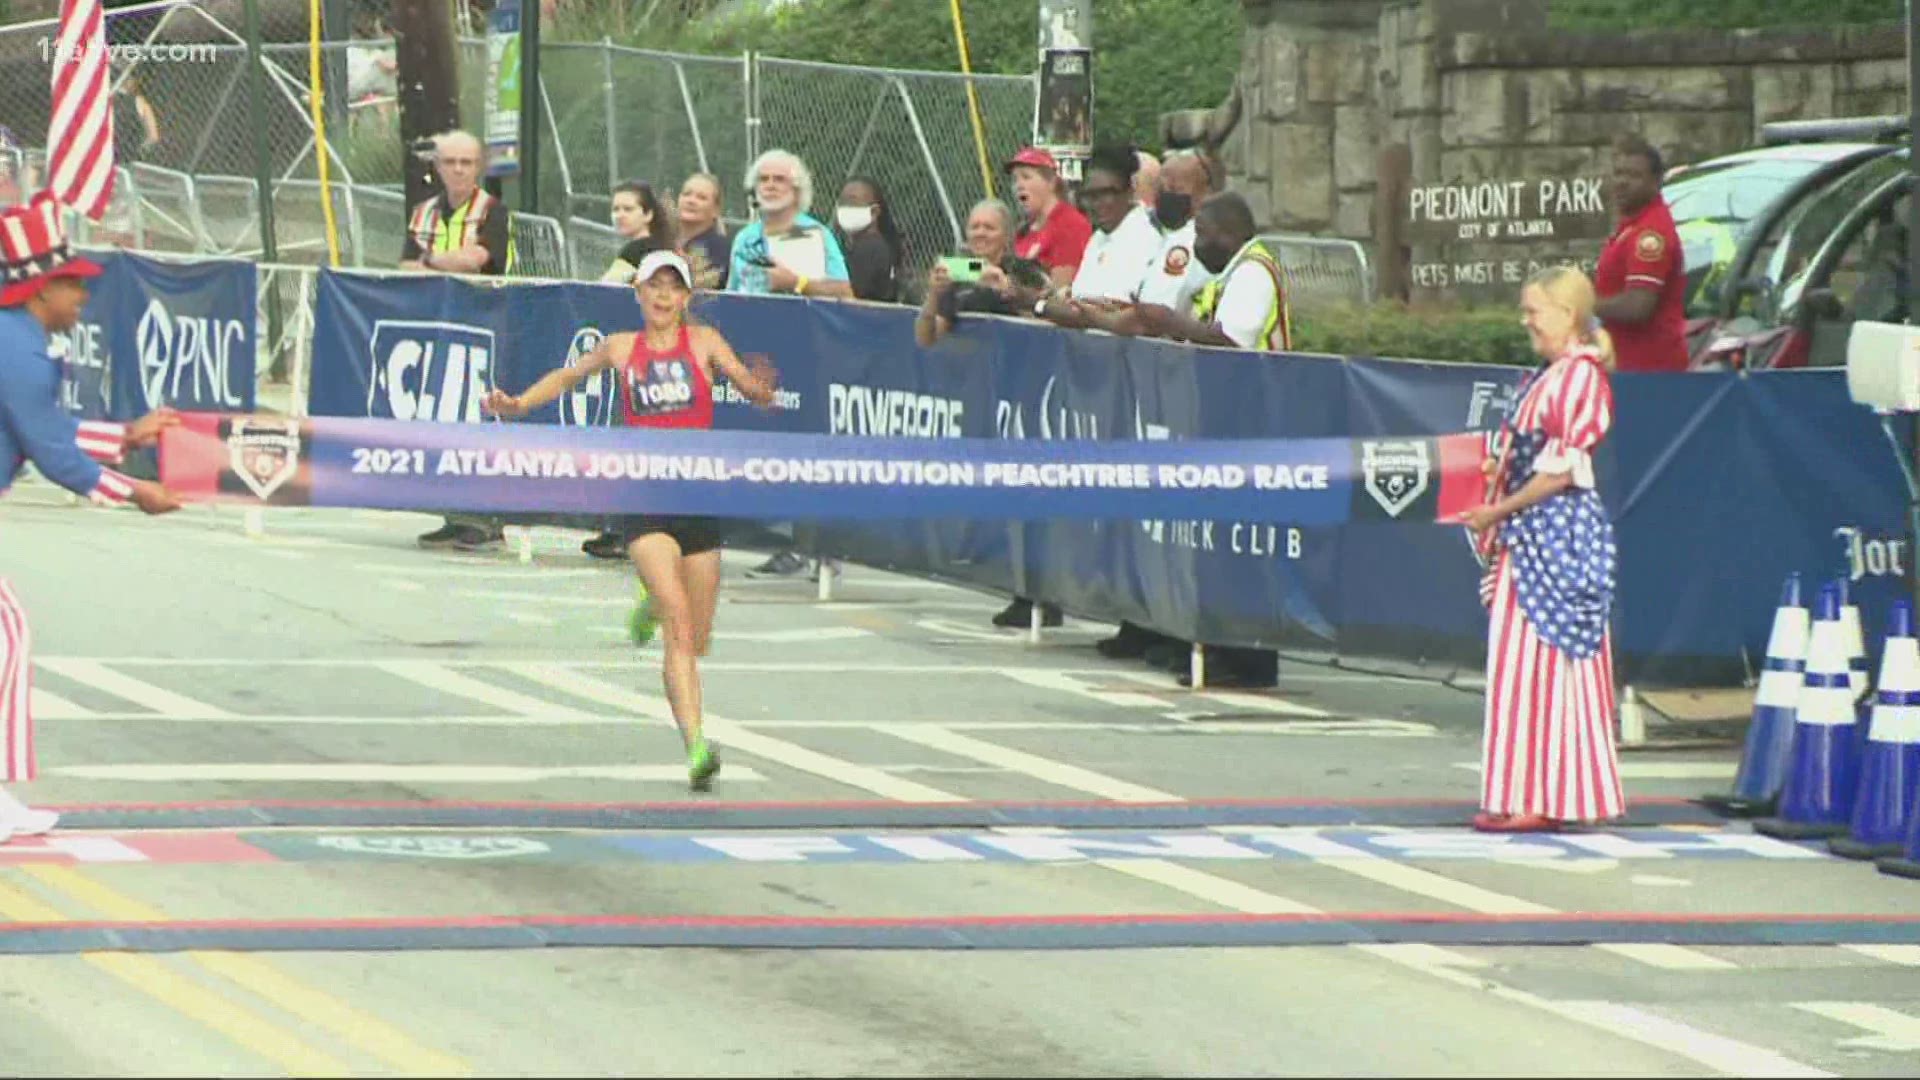 Jessica Smith of Philadelphia was first across on Saturday morning among the women runners.